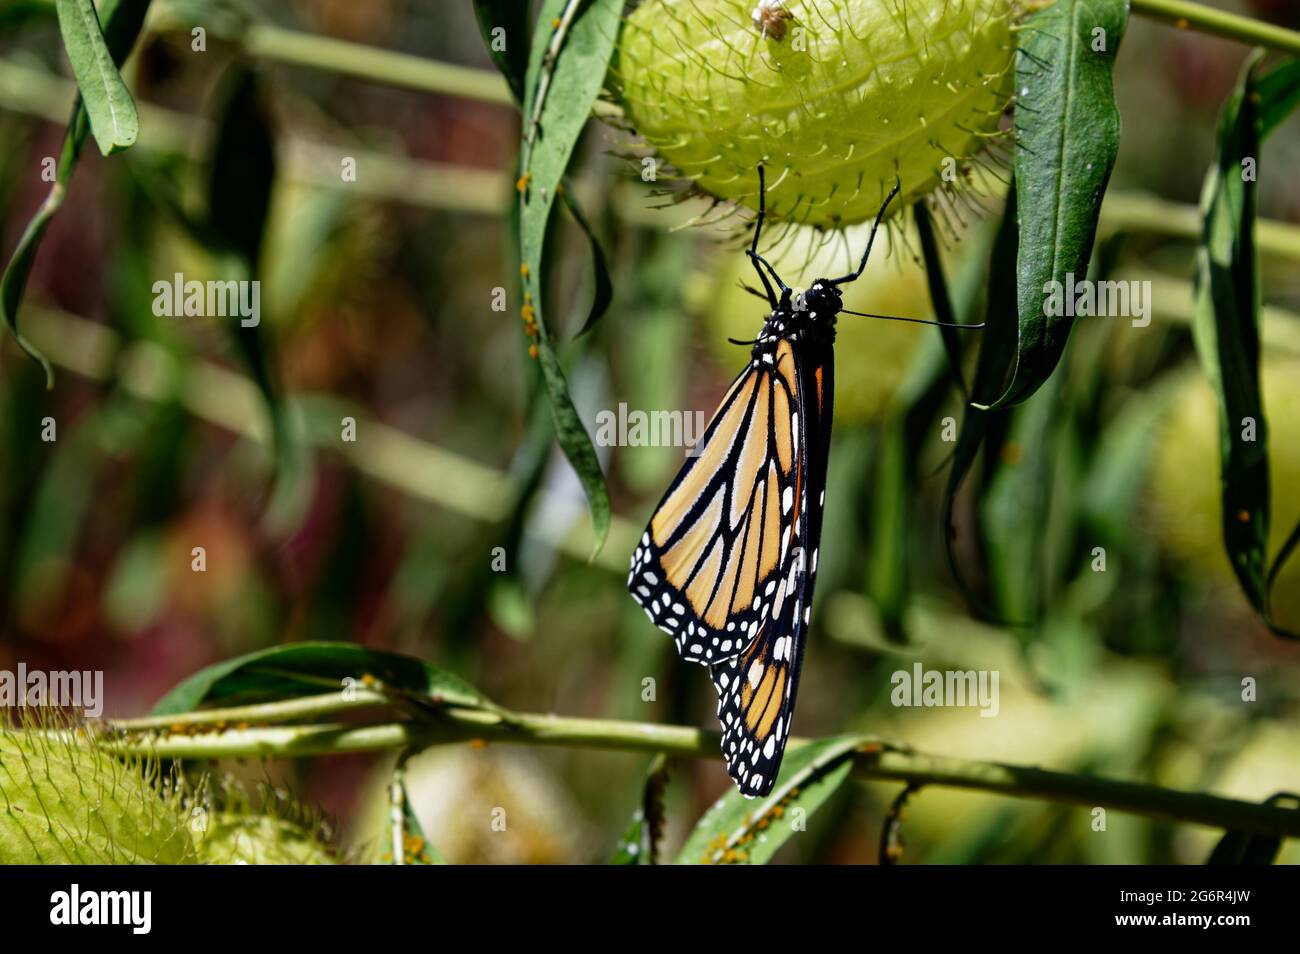 A monarch butterfly is hanging upside down on the seed pod of a milkweed plant Stock Photo